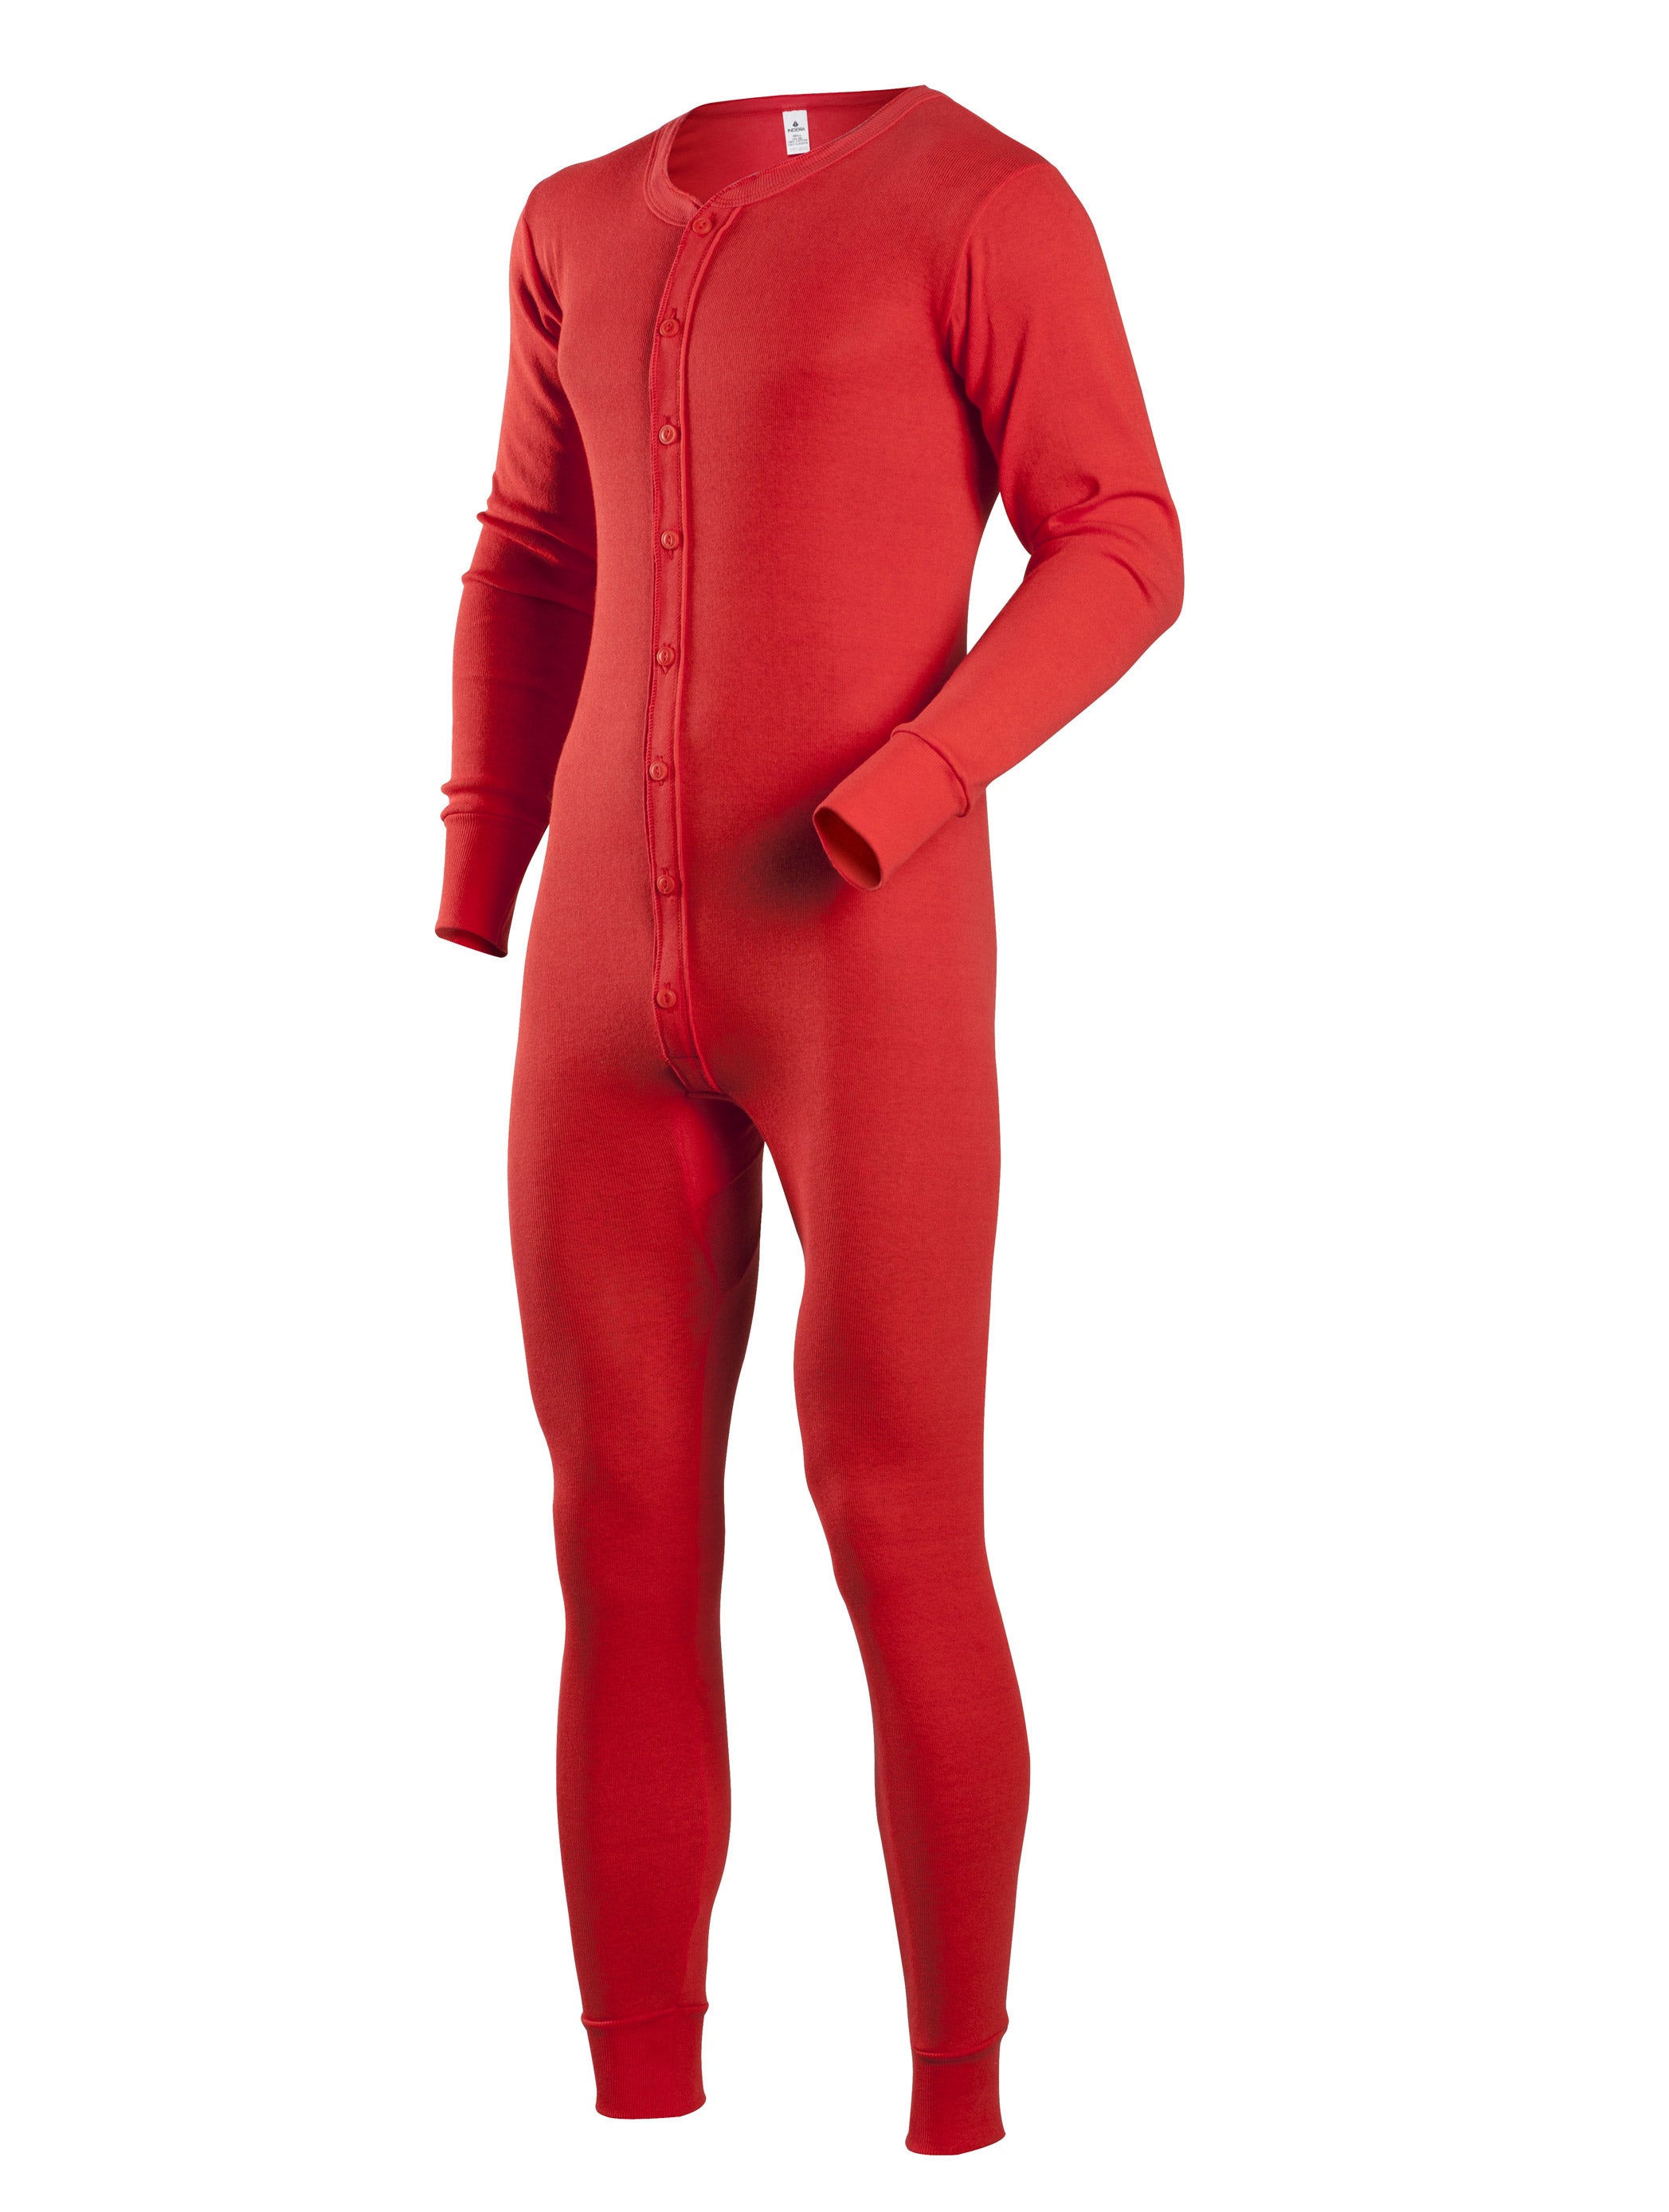 Coldmast Union Suits in Red - 865-B - Big Man Sizes